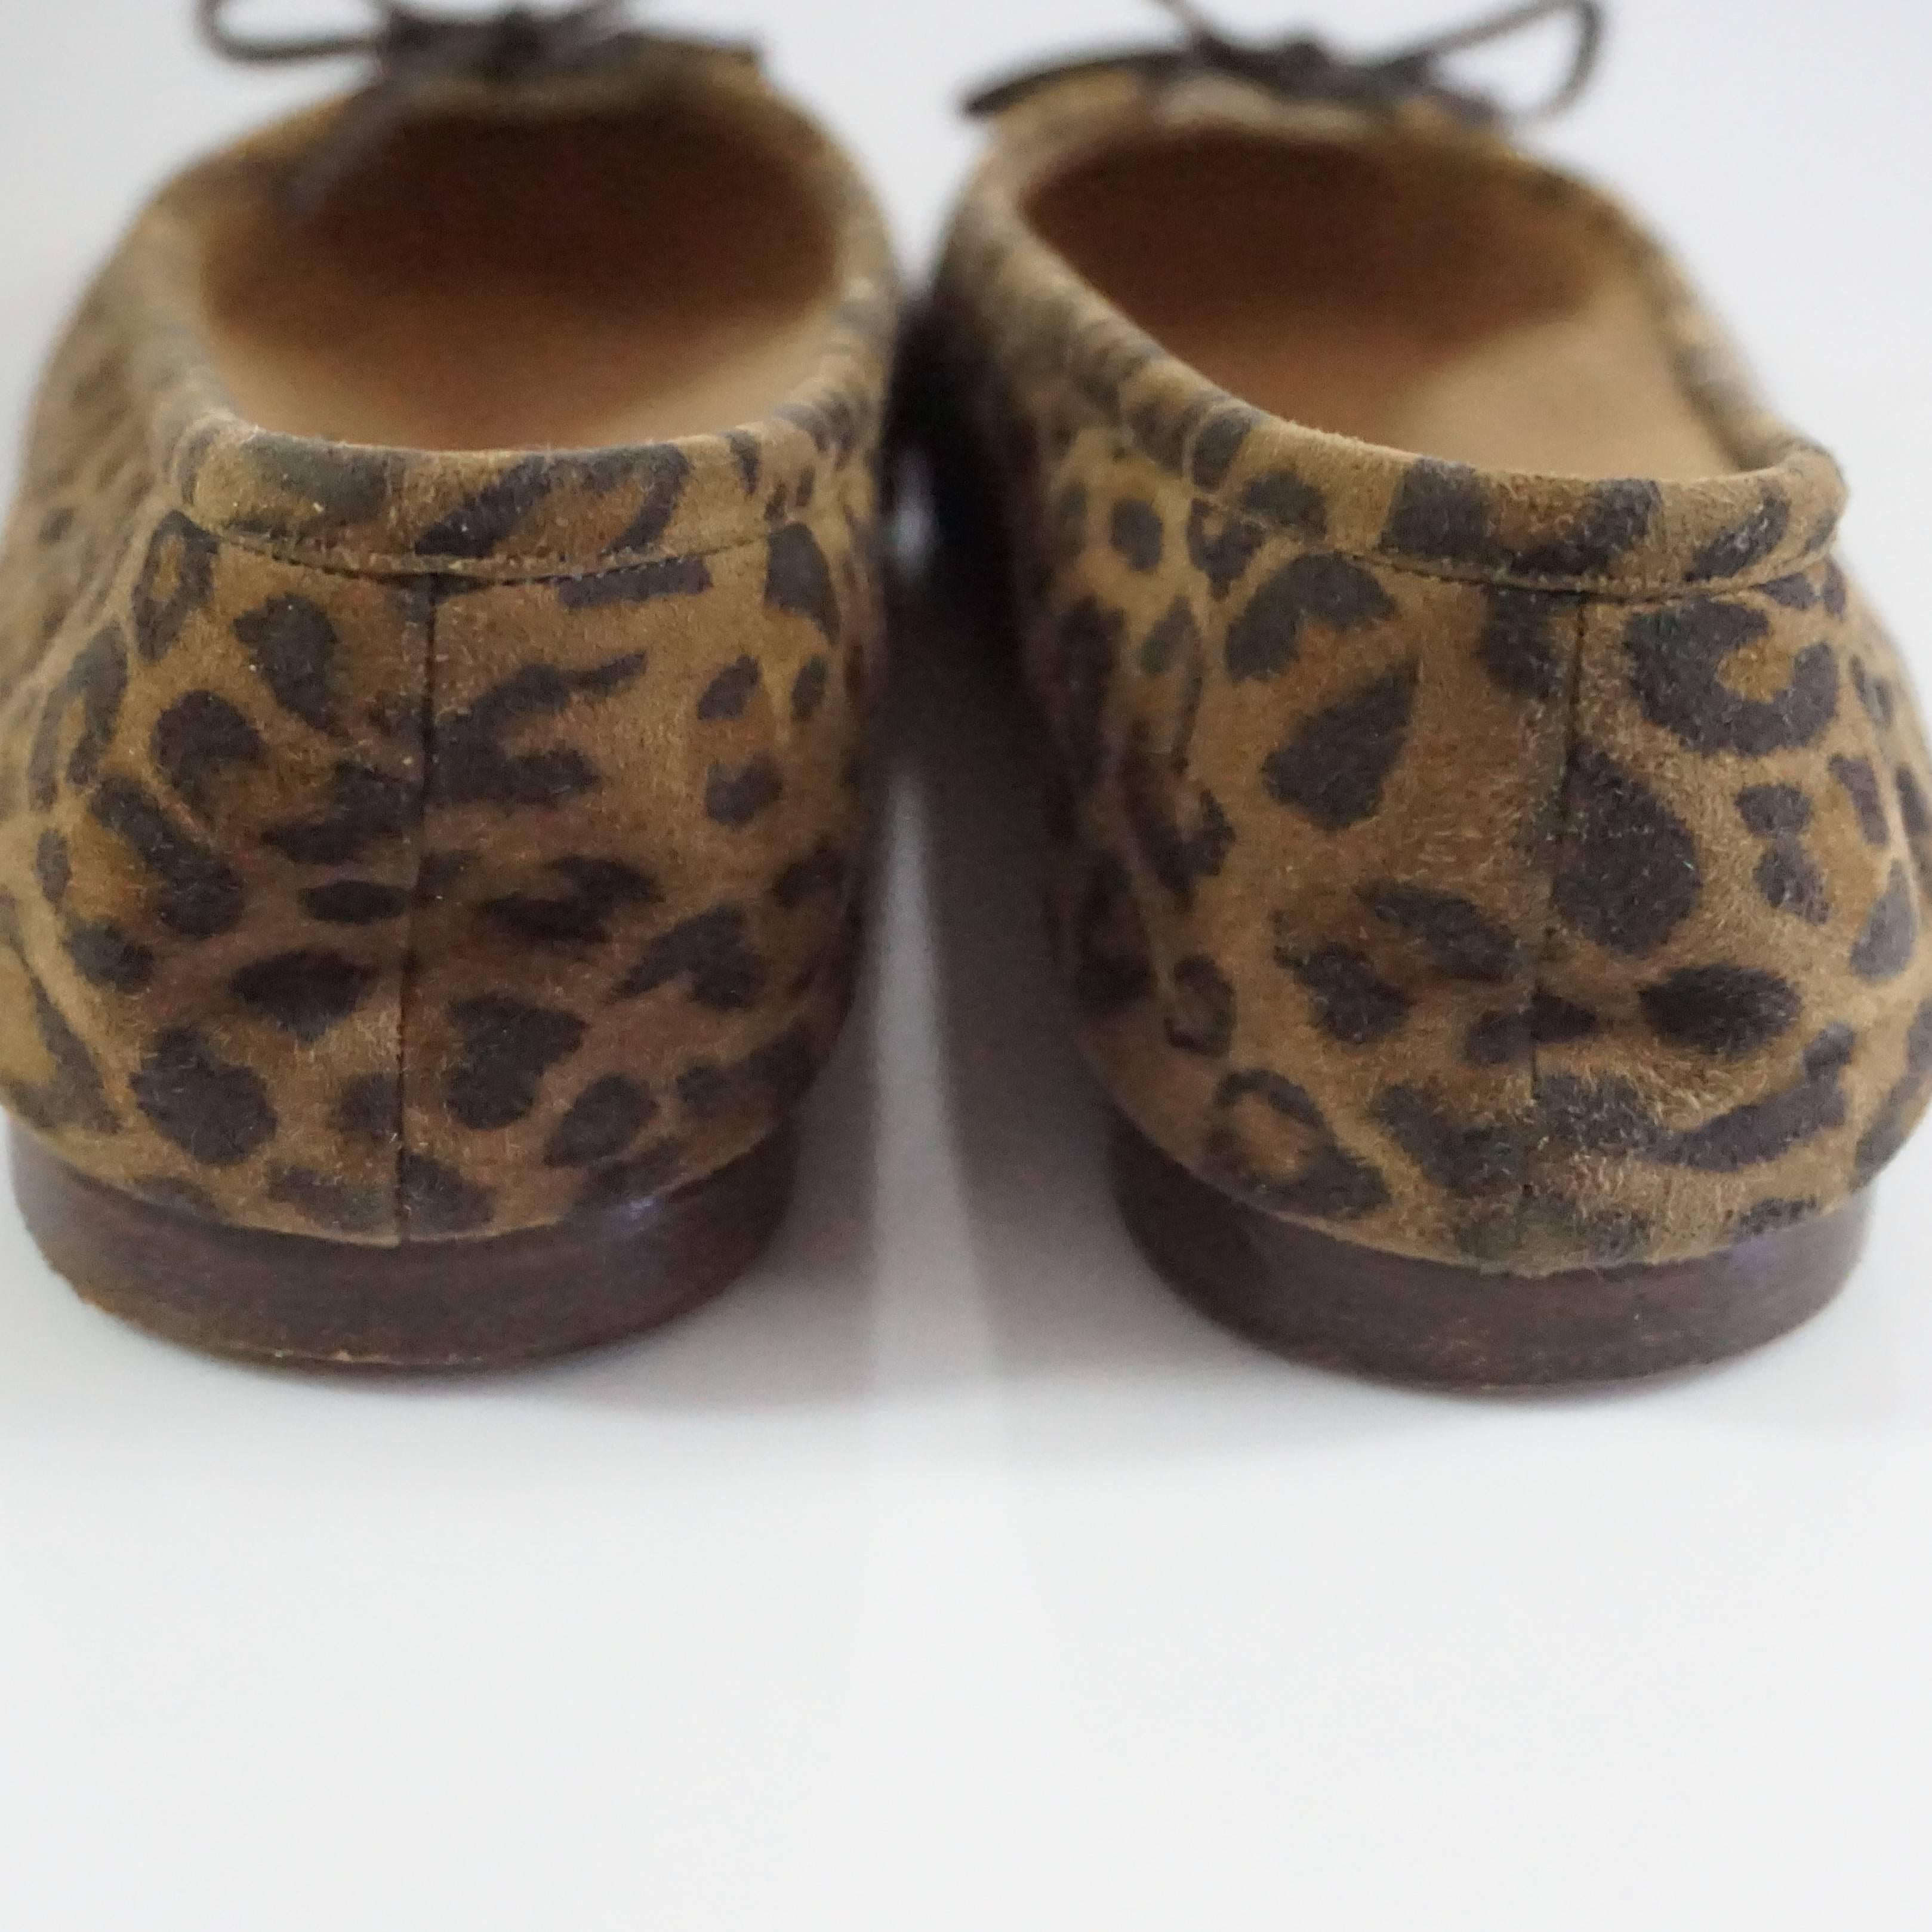 Manolo Blahnik Animal Print Suede Flats - 38.5 In Fair Condition For Sale In West Palm Beach, FL